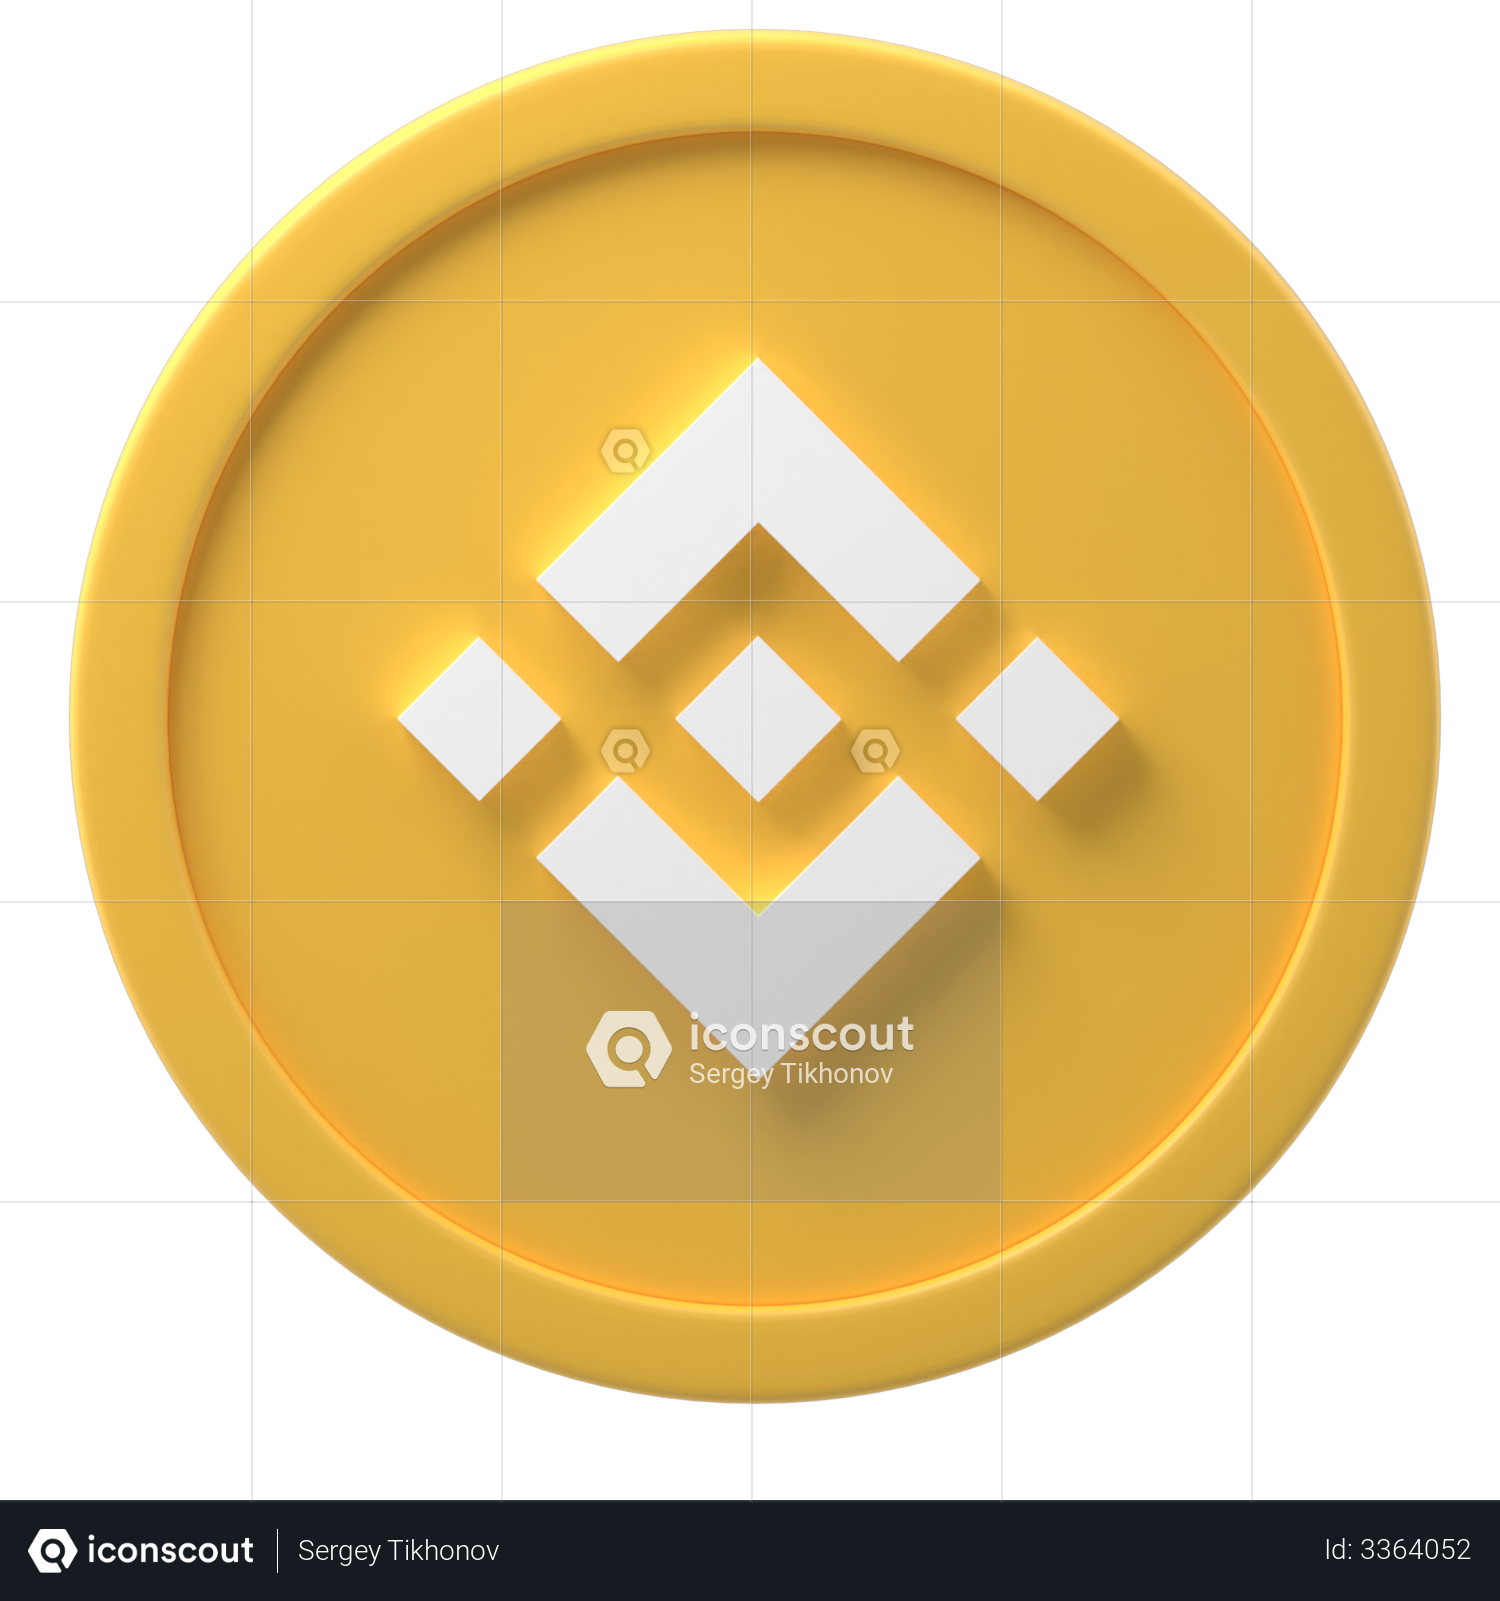 which coins will binance us support